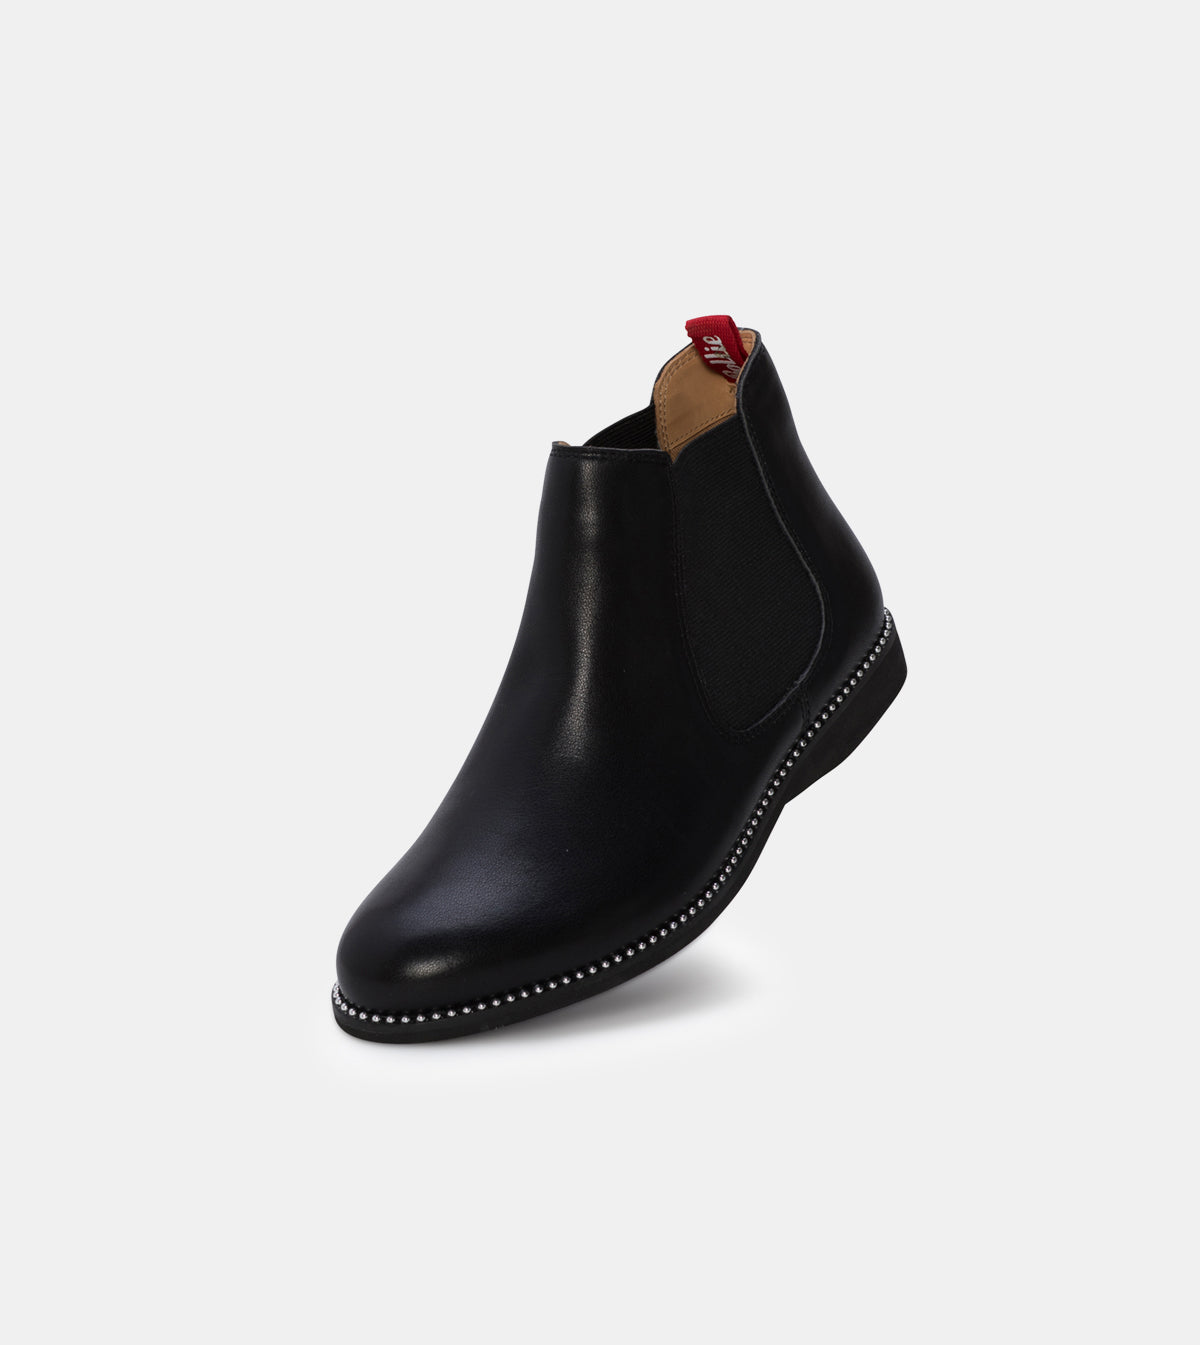 chelsea boots with black studs